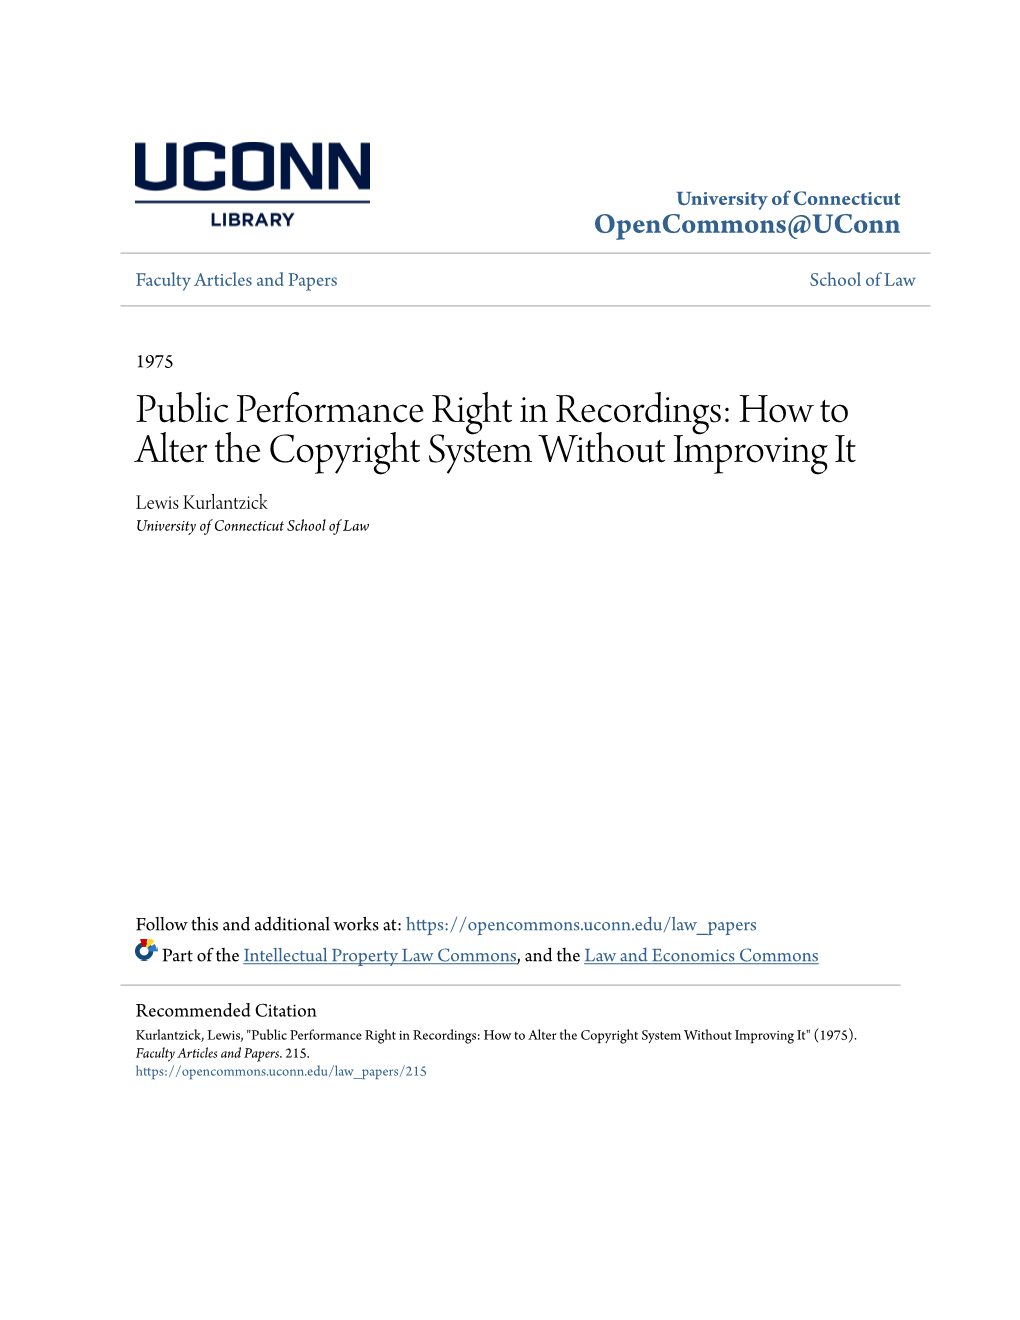 Public Performance Right in Recordings: How to Alter the Copyright System Without Improving It Lewis Kurlantzick University of Connecticut School of Law